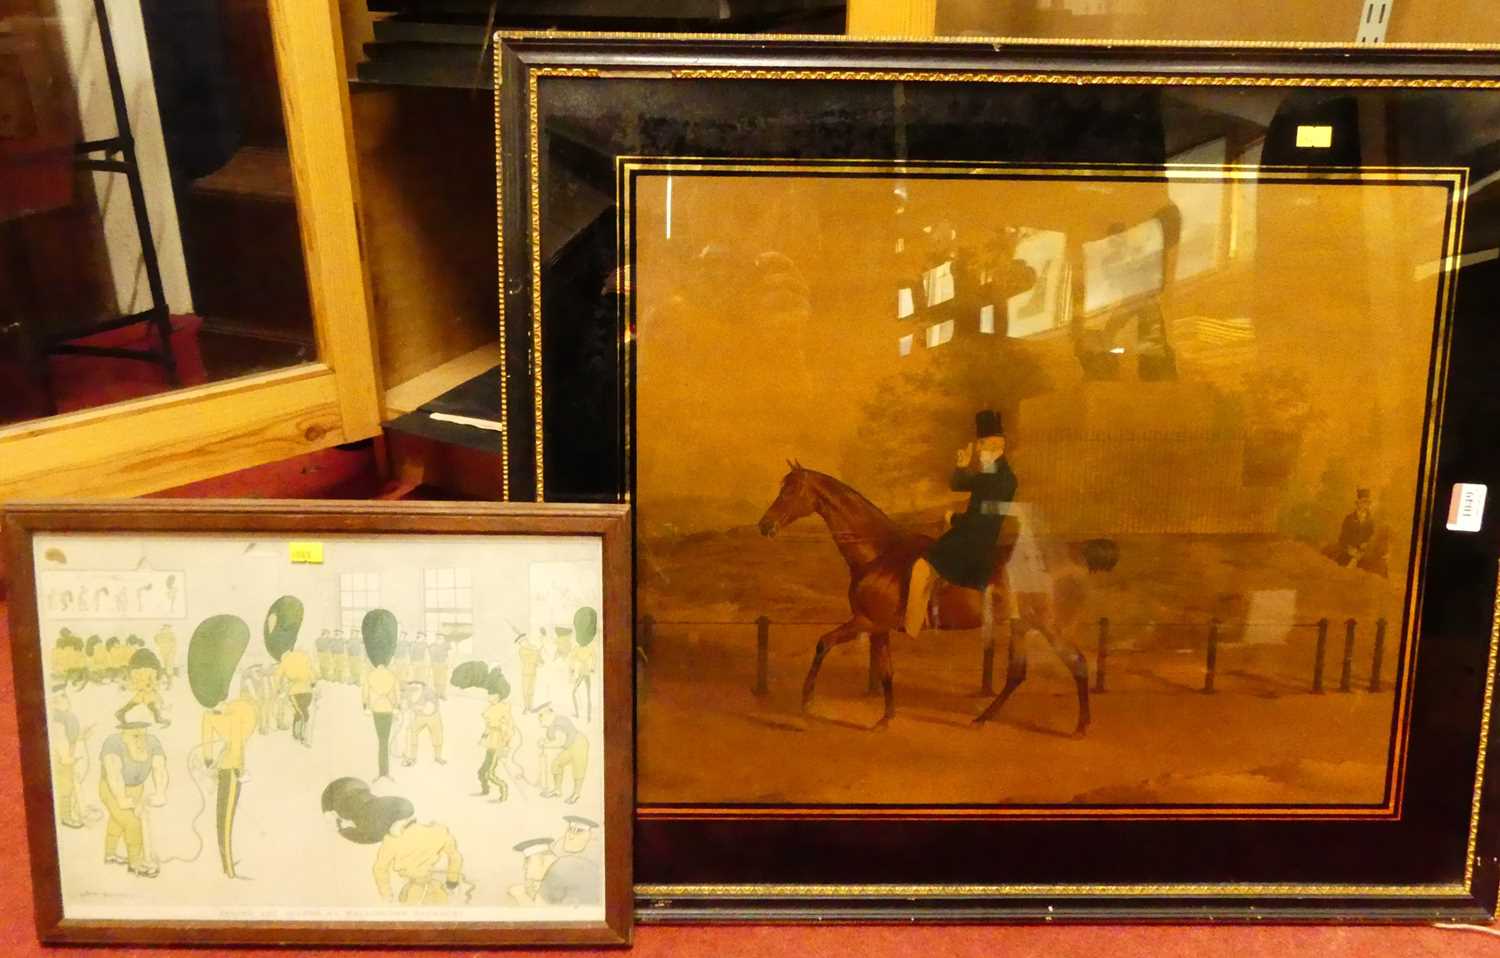 19th century print depicting racehorse with trainer up, 42x52cm in Hogarth frame together with an HM